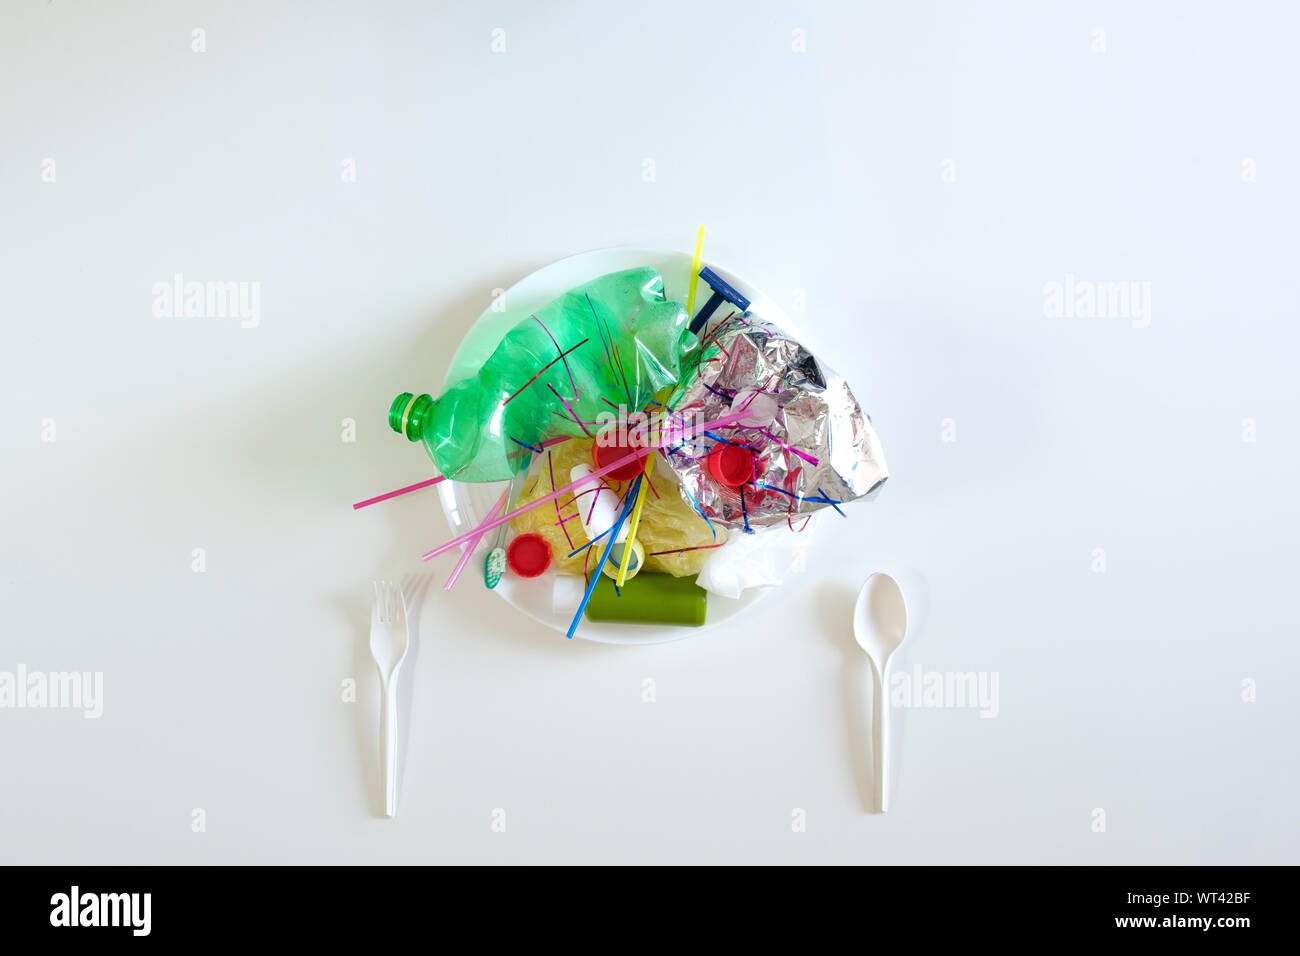 Plastic trash on a plate. The concept of environmental pollution with plastic waste and the danger of microplastics for human health Stock Photo